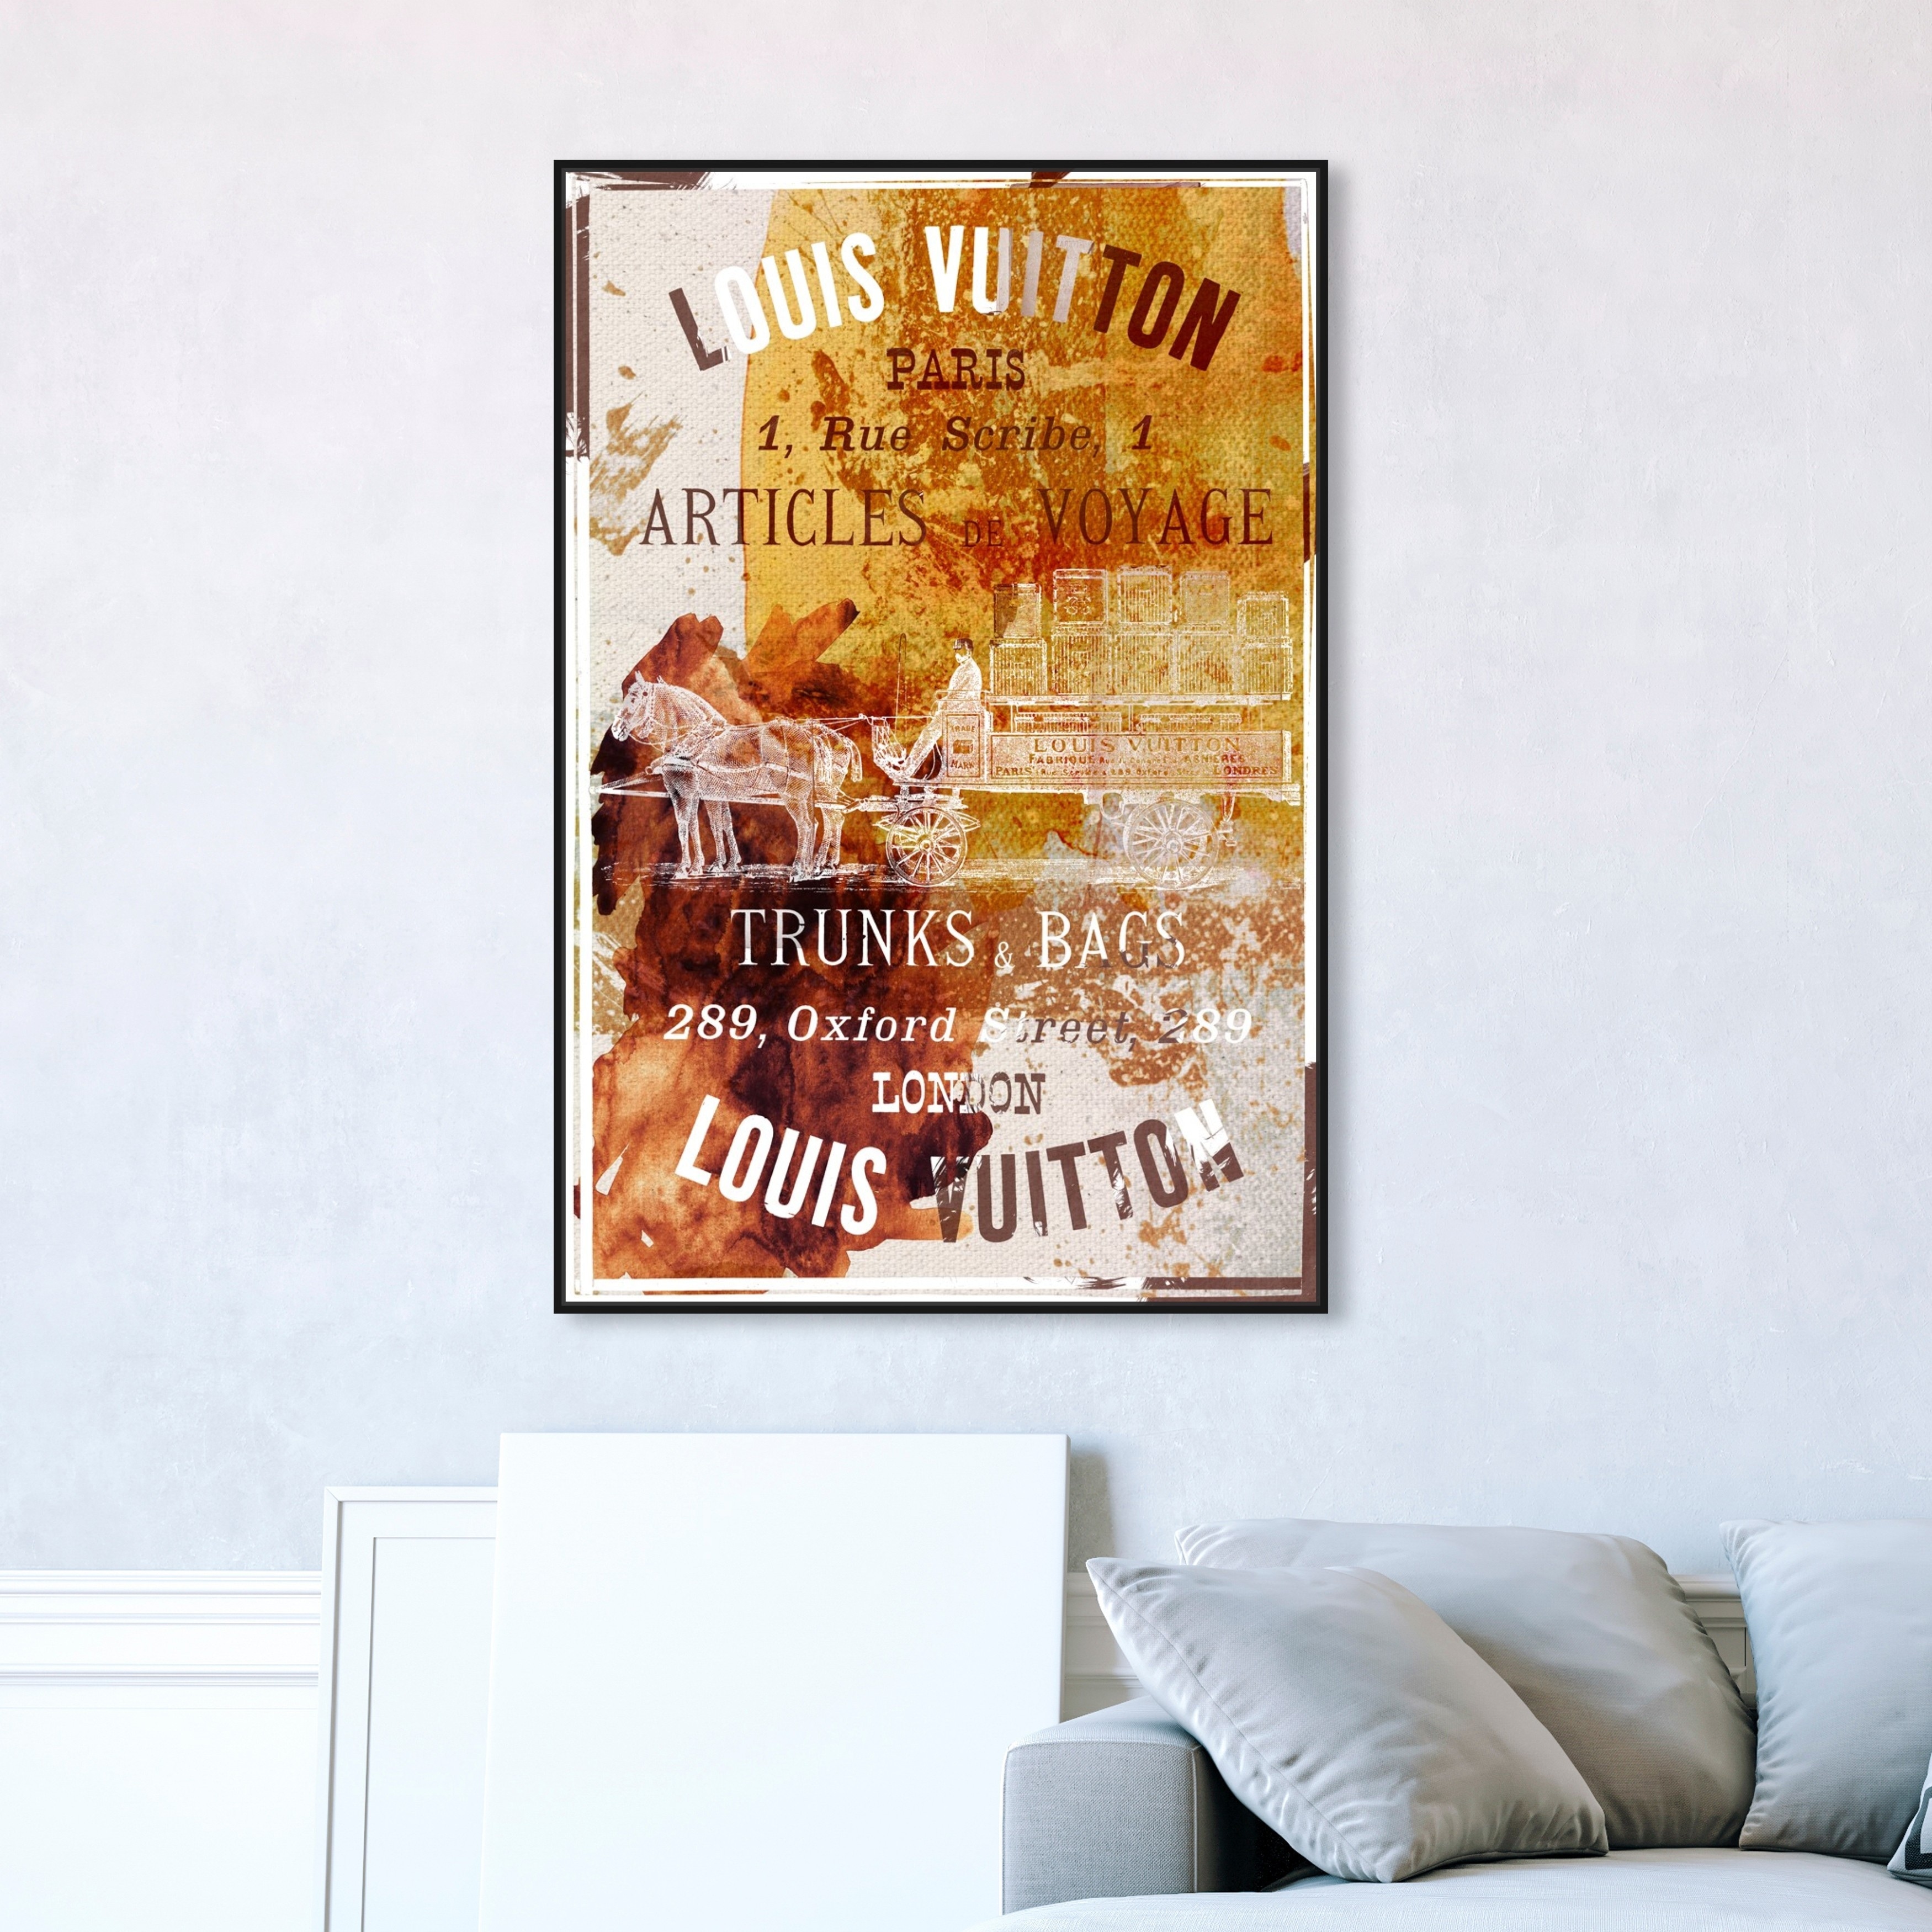 Oliver Gal Fashion and Glam Wall Art Framed Canvas Prints 'Articles de Voyage Gold Leaf' Road Signs - Gold, White - 30 x 45